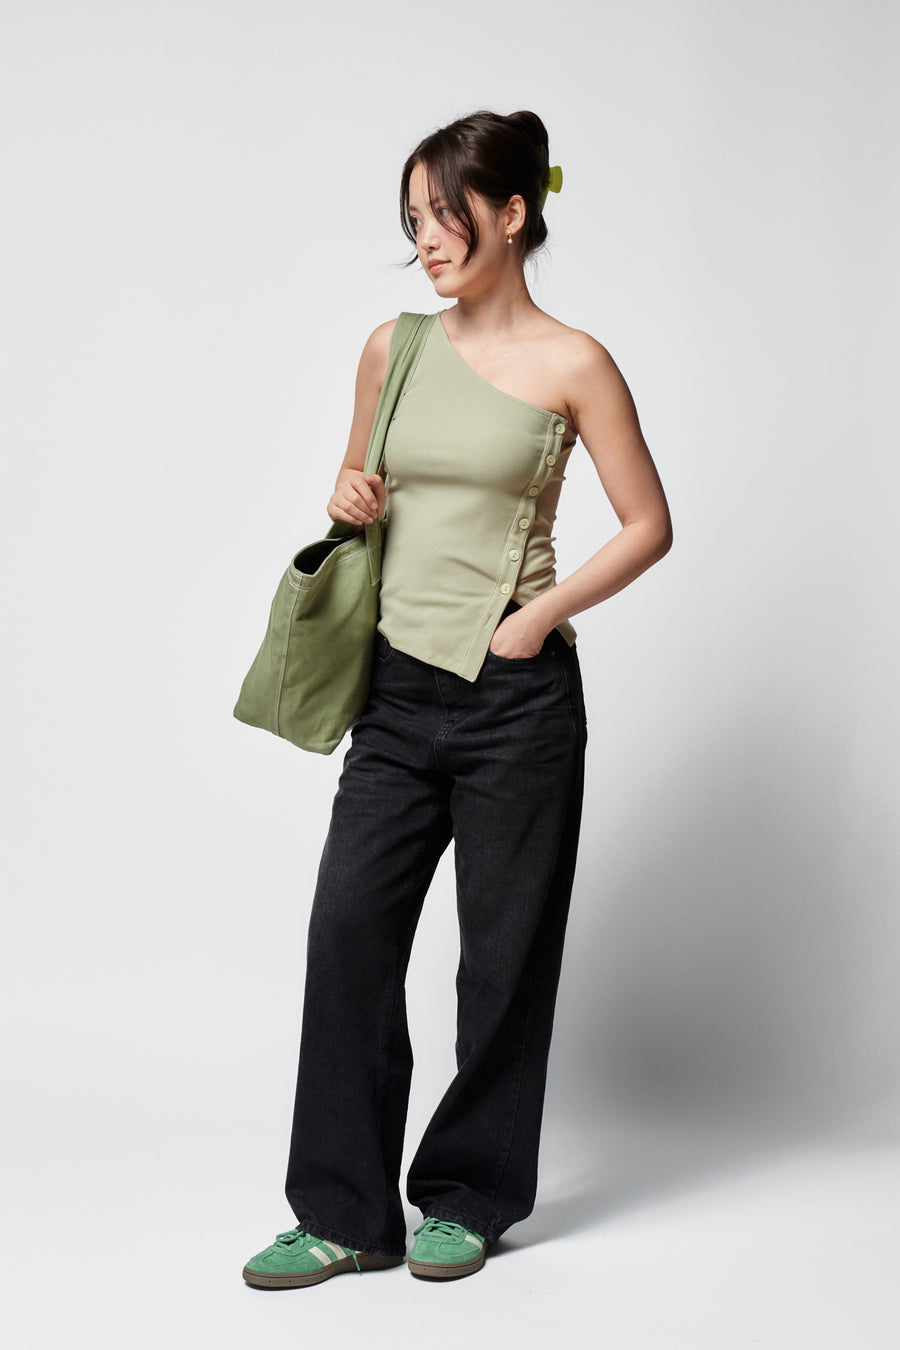 Kaia One Shoulder Tank + Green - Little Puffy